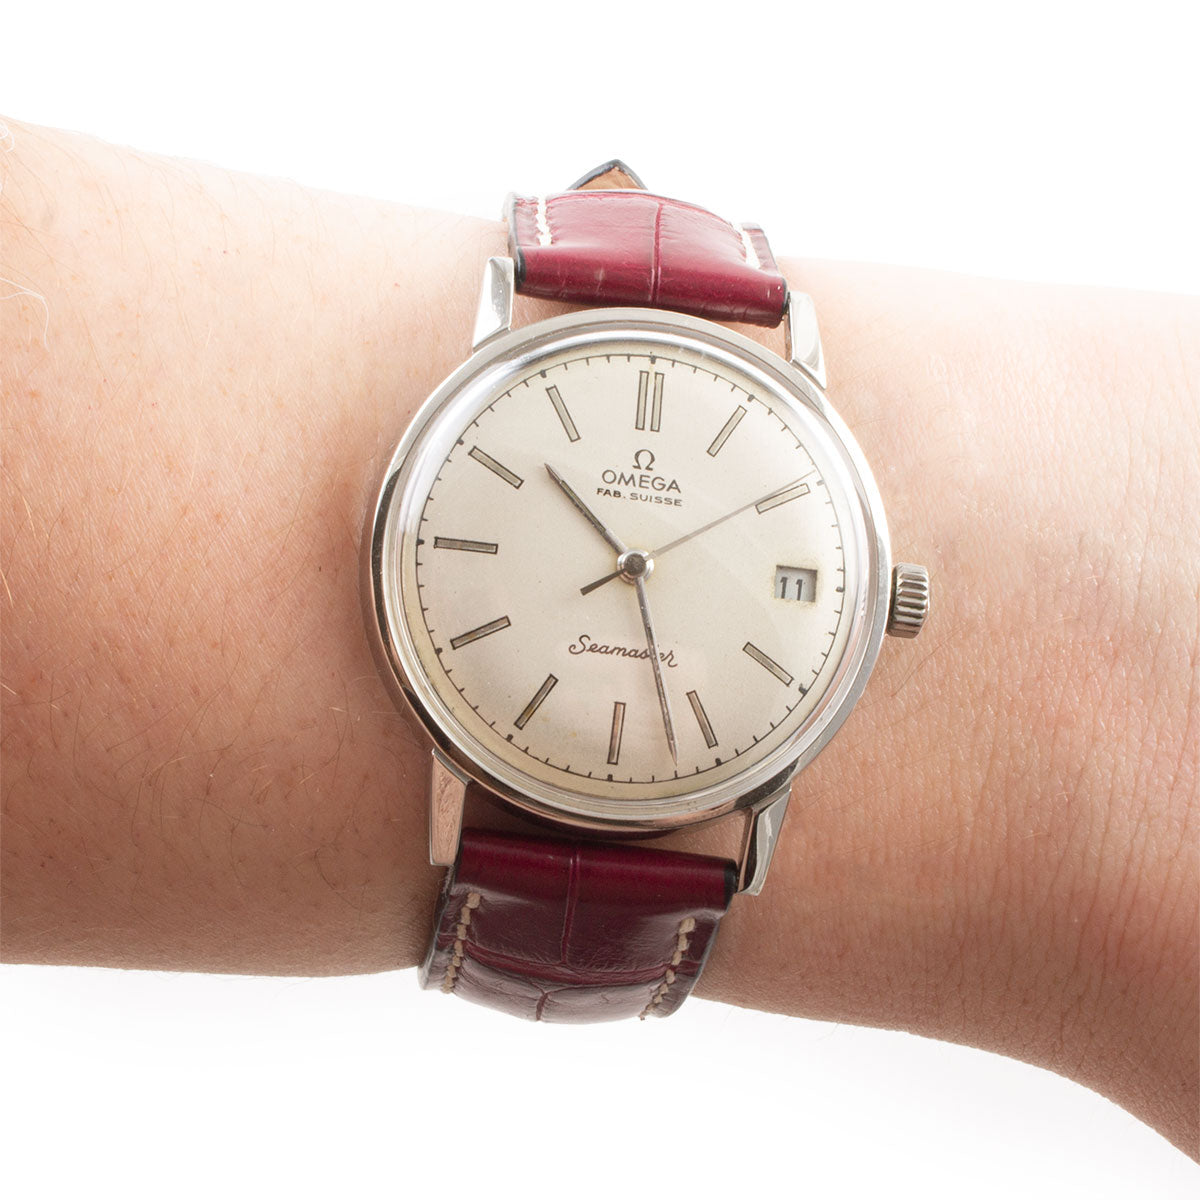 Second-hand watch - Omega - Seamaster Date - 1900€